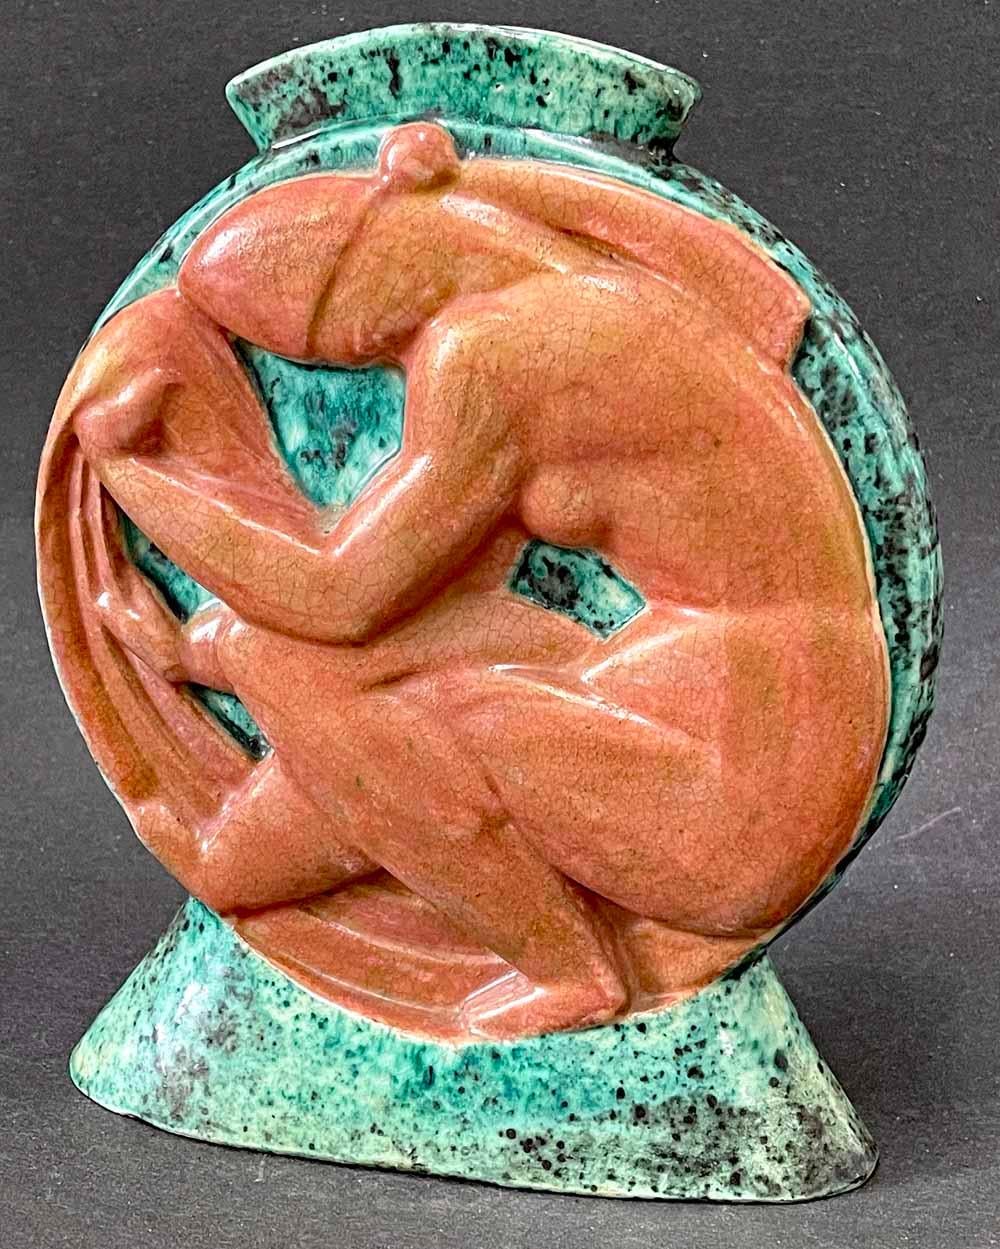 Boldly sculpted and glazed by one of the masters of French Art Deco, this vase is dominated by a seated female nude figure, her scarfed head bowed and her legs crossed, glazed in a rich terra cotta hue, in strong bas relief.  The surround is a